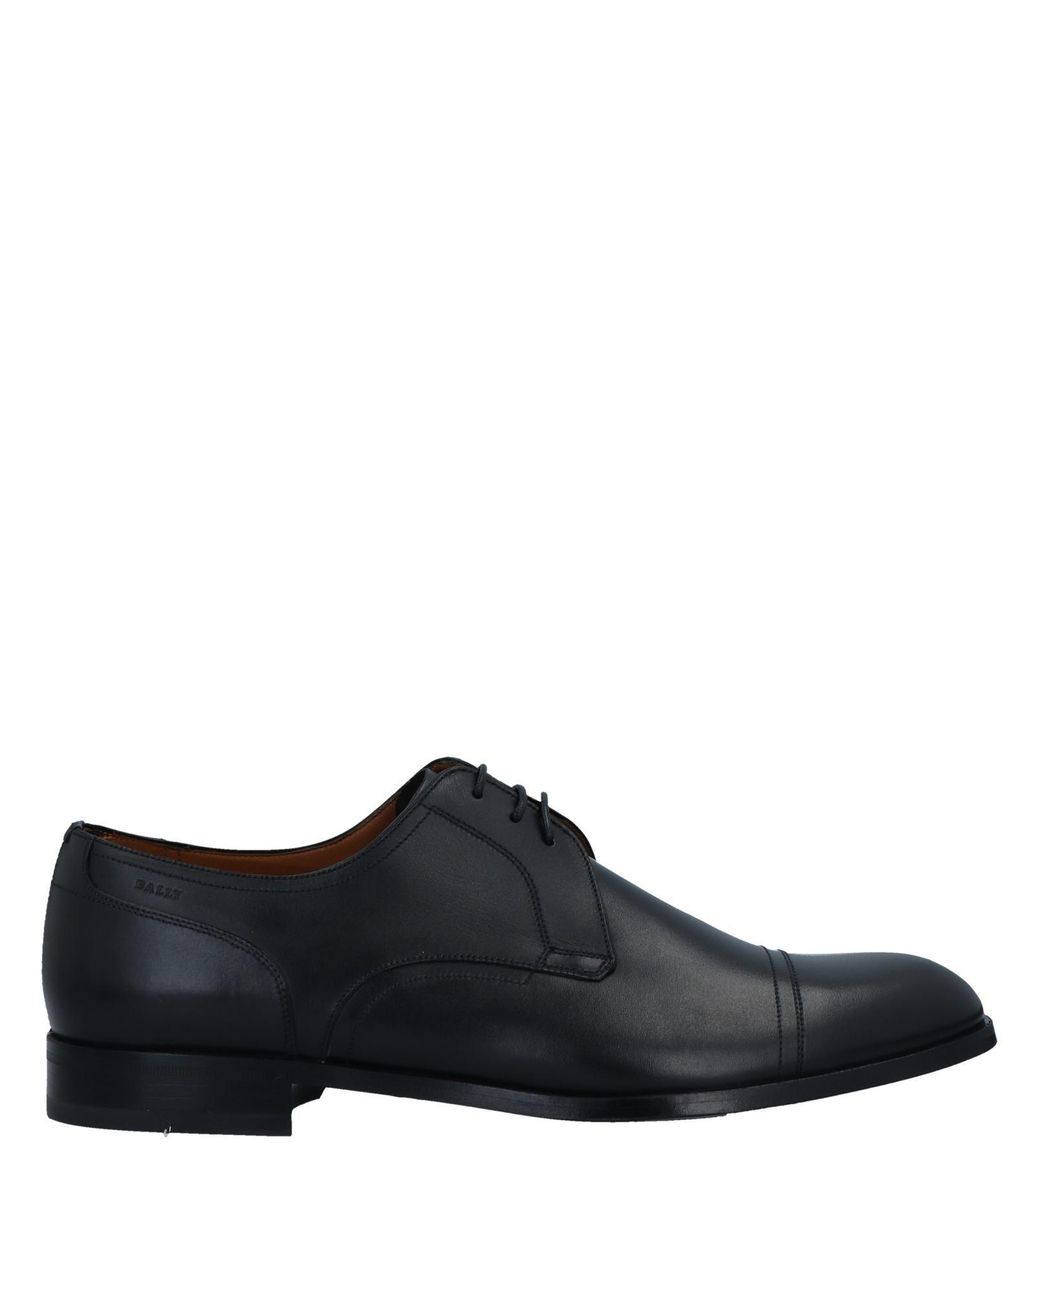 Bally Leather Lace-up Derby Shoes in Black for Men Mens Shoes Lace-ups Derby shoes 